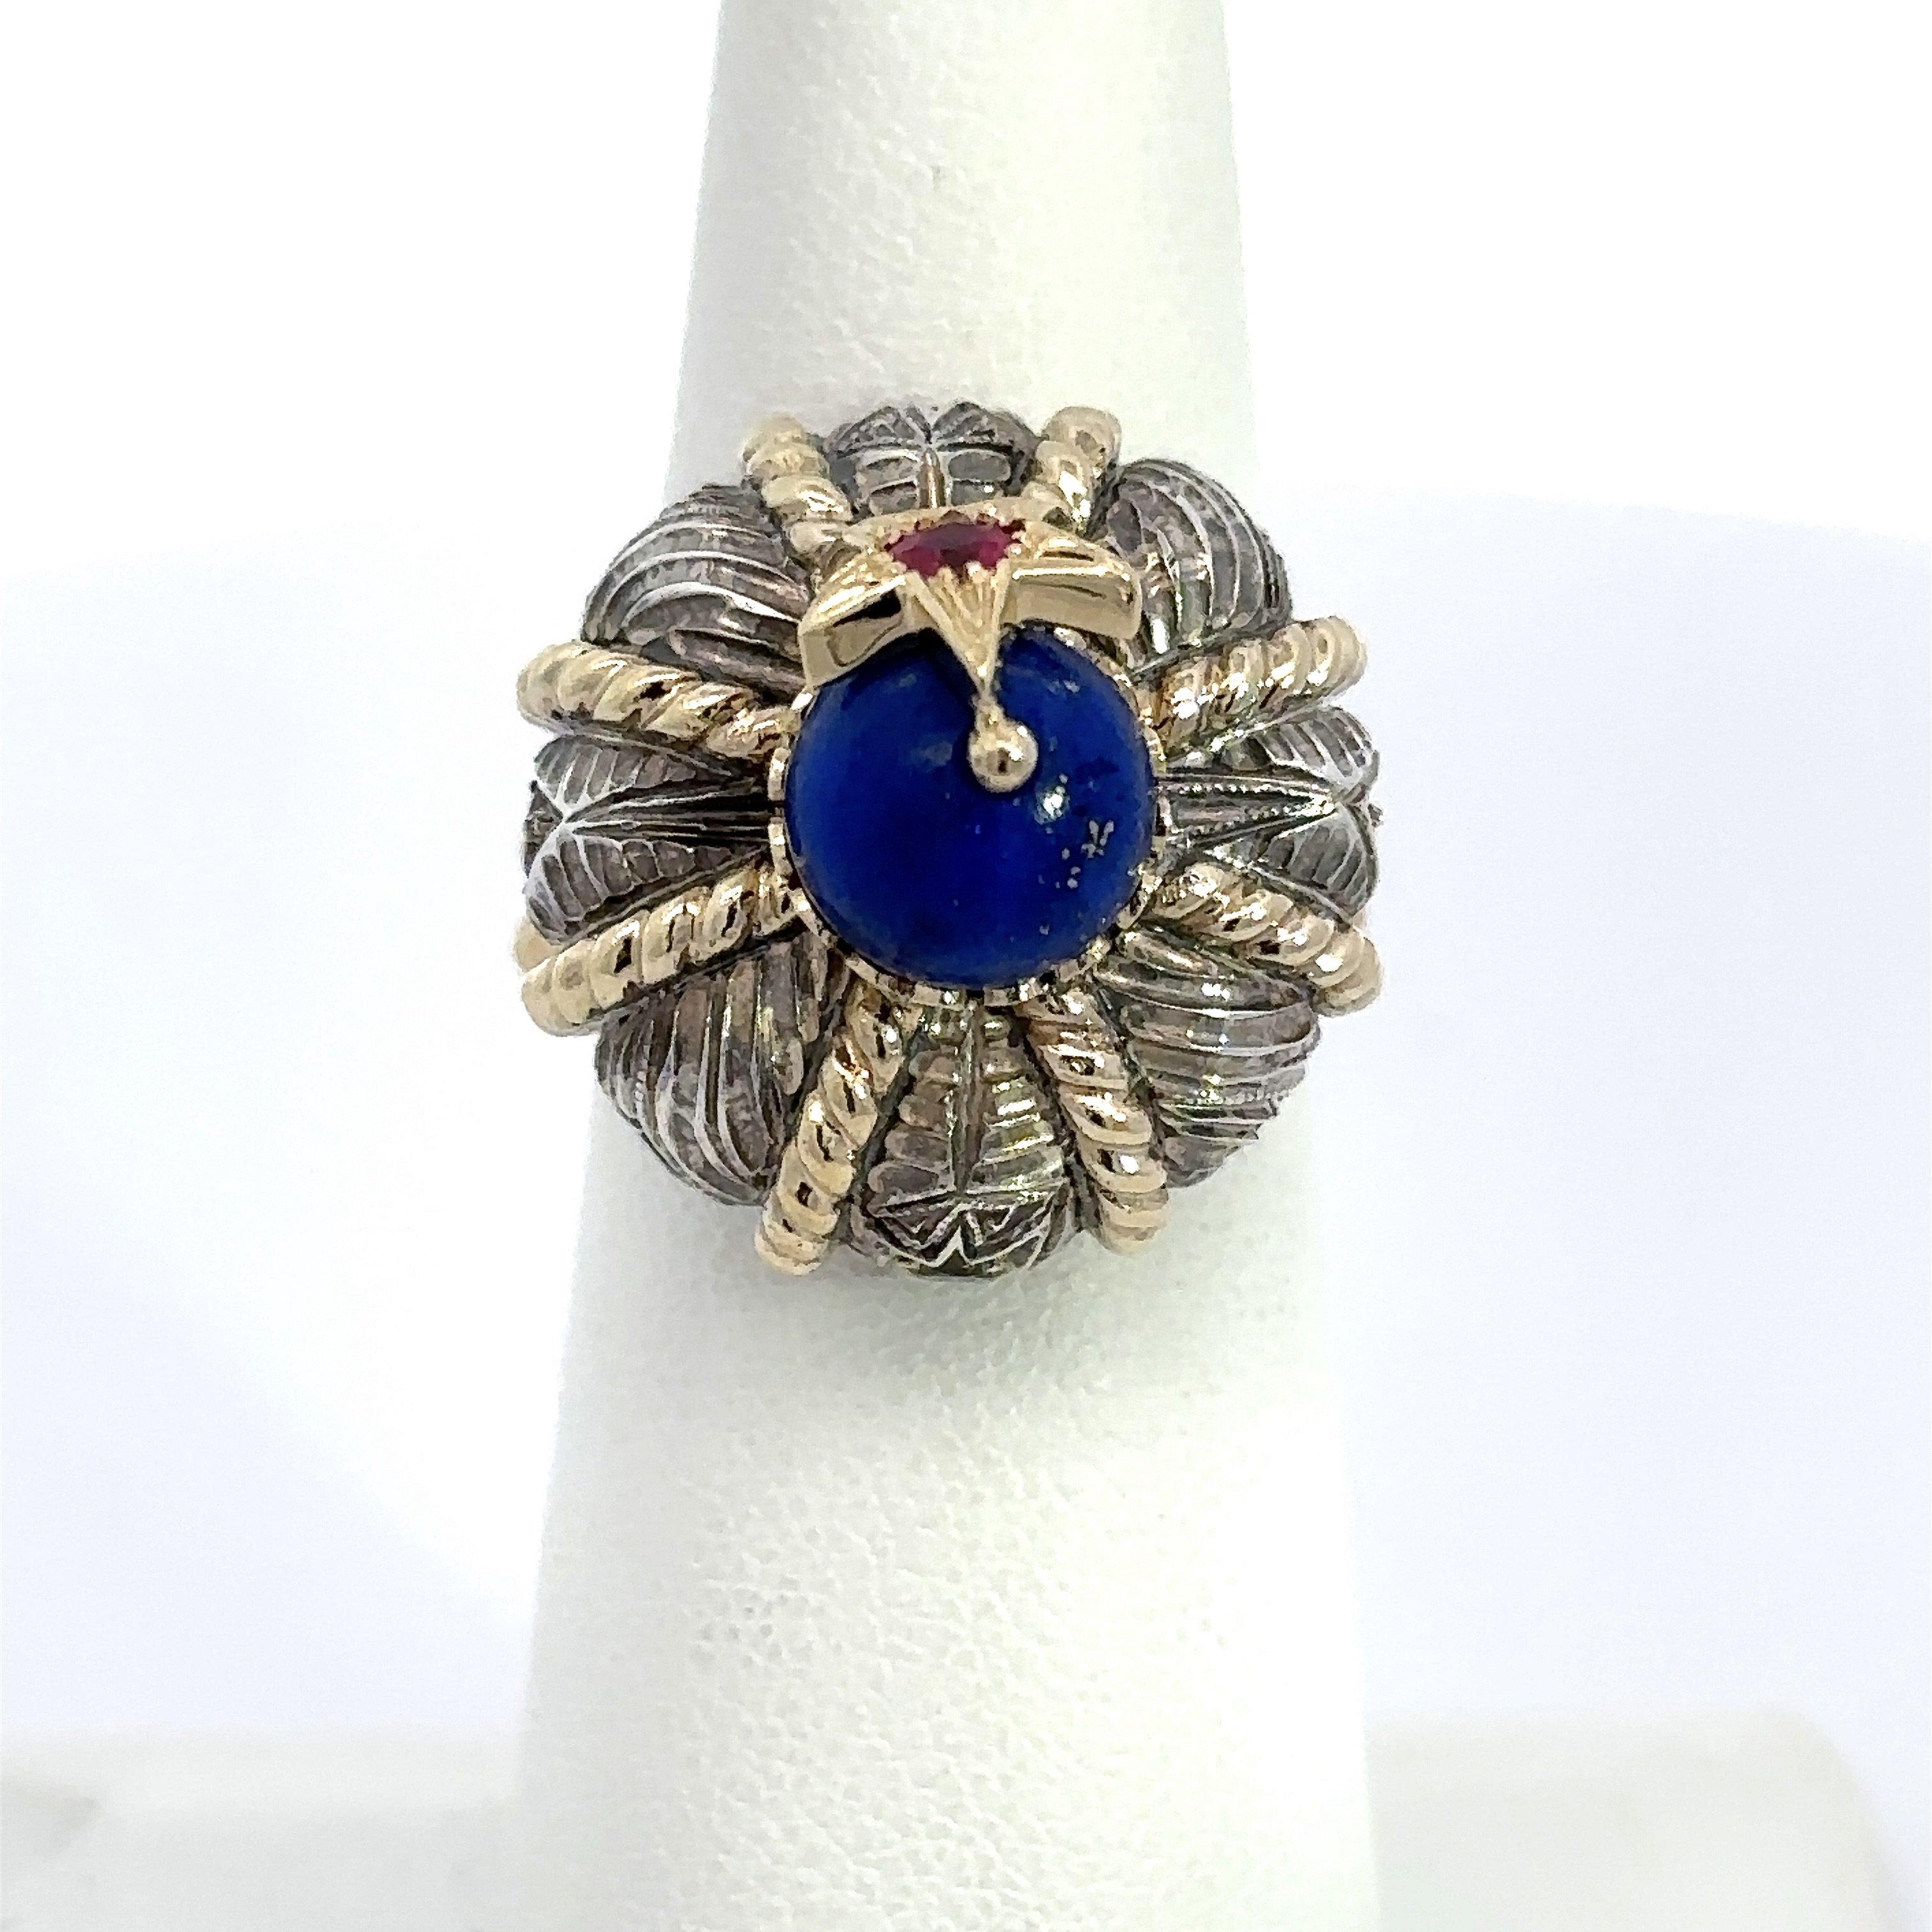 Nardi Venice Turbante Gemstone Ring, 18KT Yellow Gold and Sterling Silver In Good Condition For Sale In Los Angeles, CA